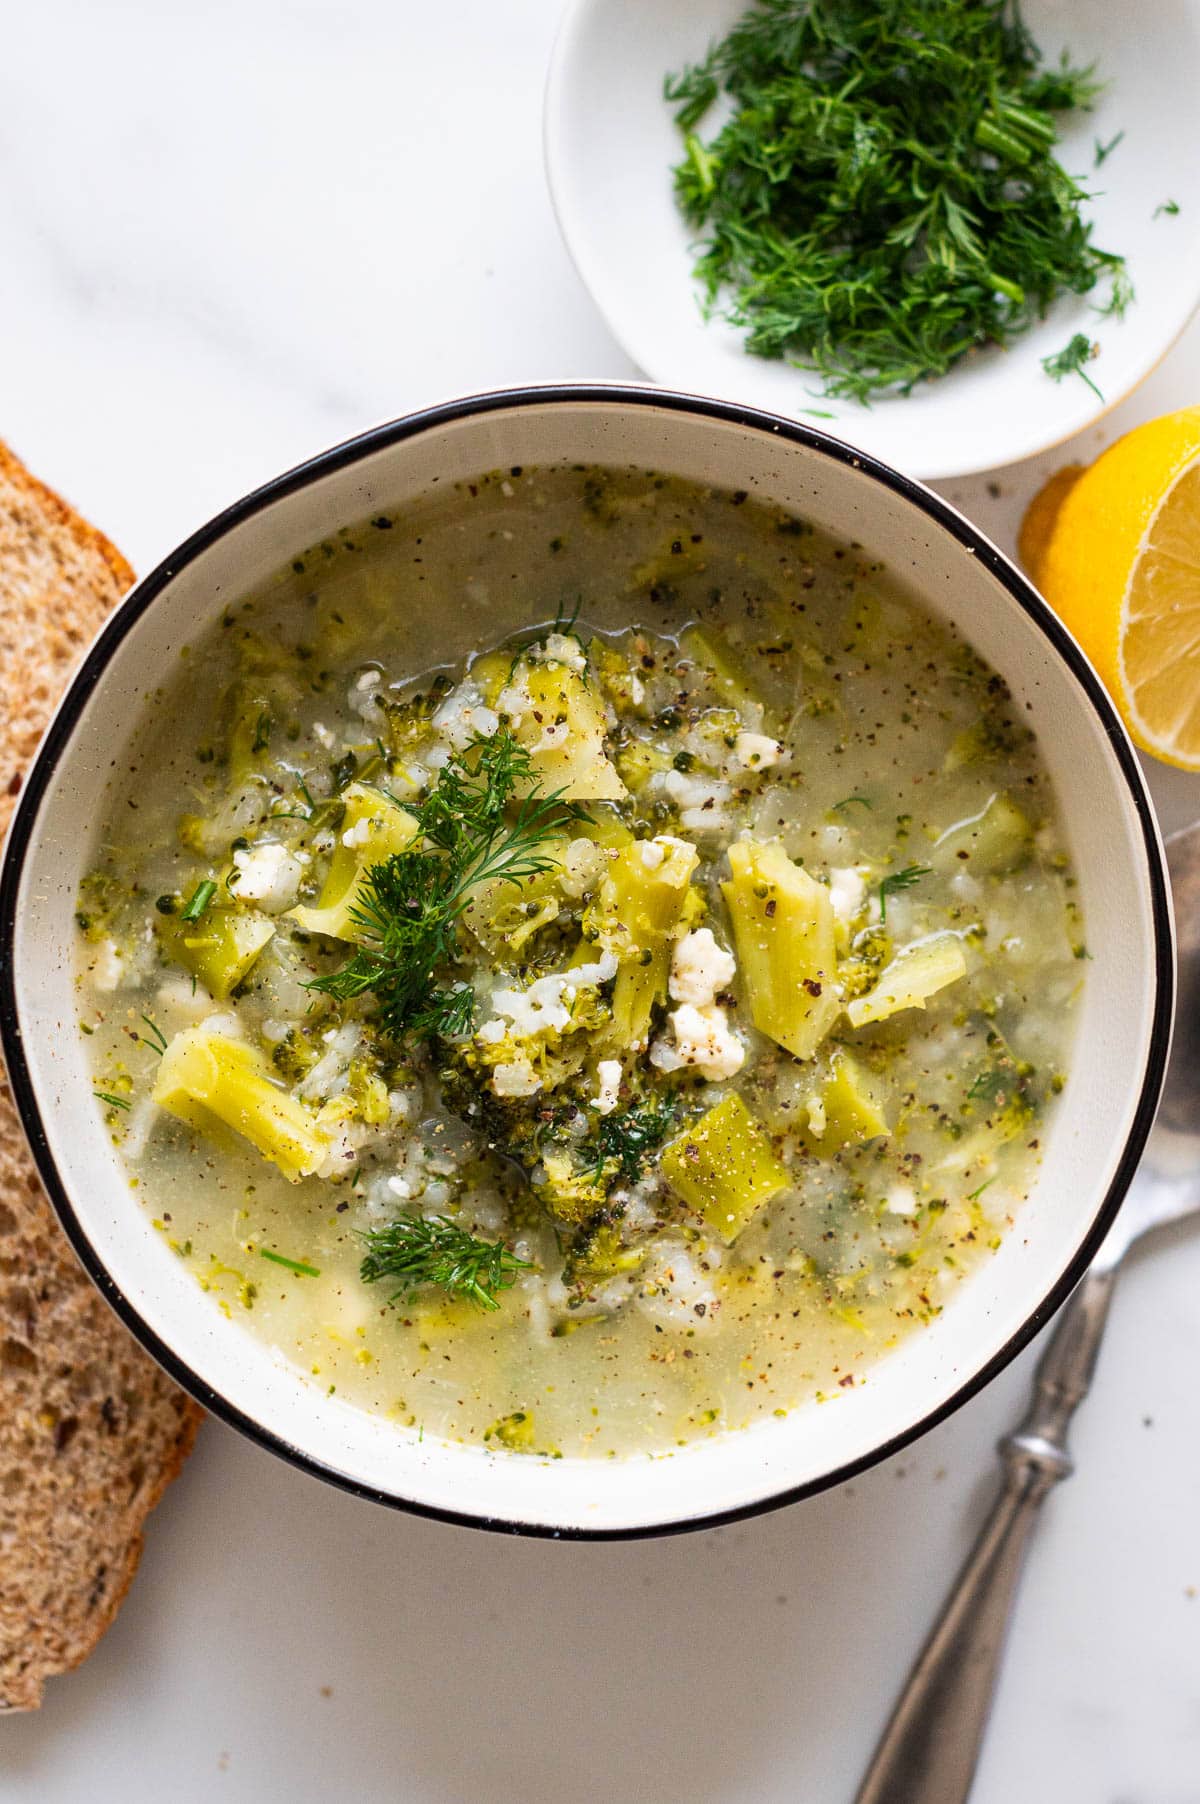 Broccoli feta soup garnished with dill and pepper and served in a bowl.